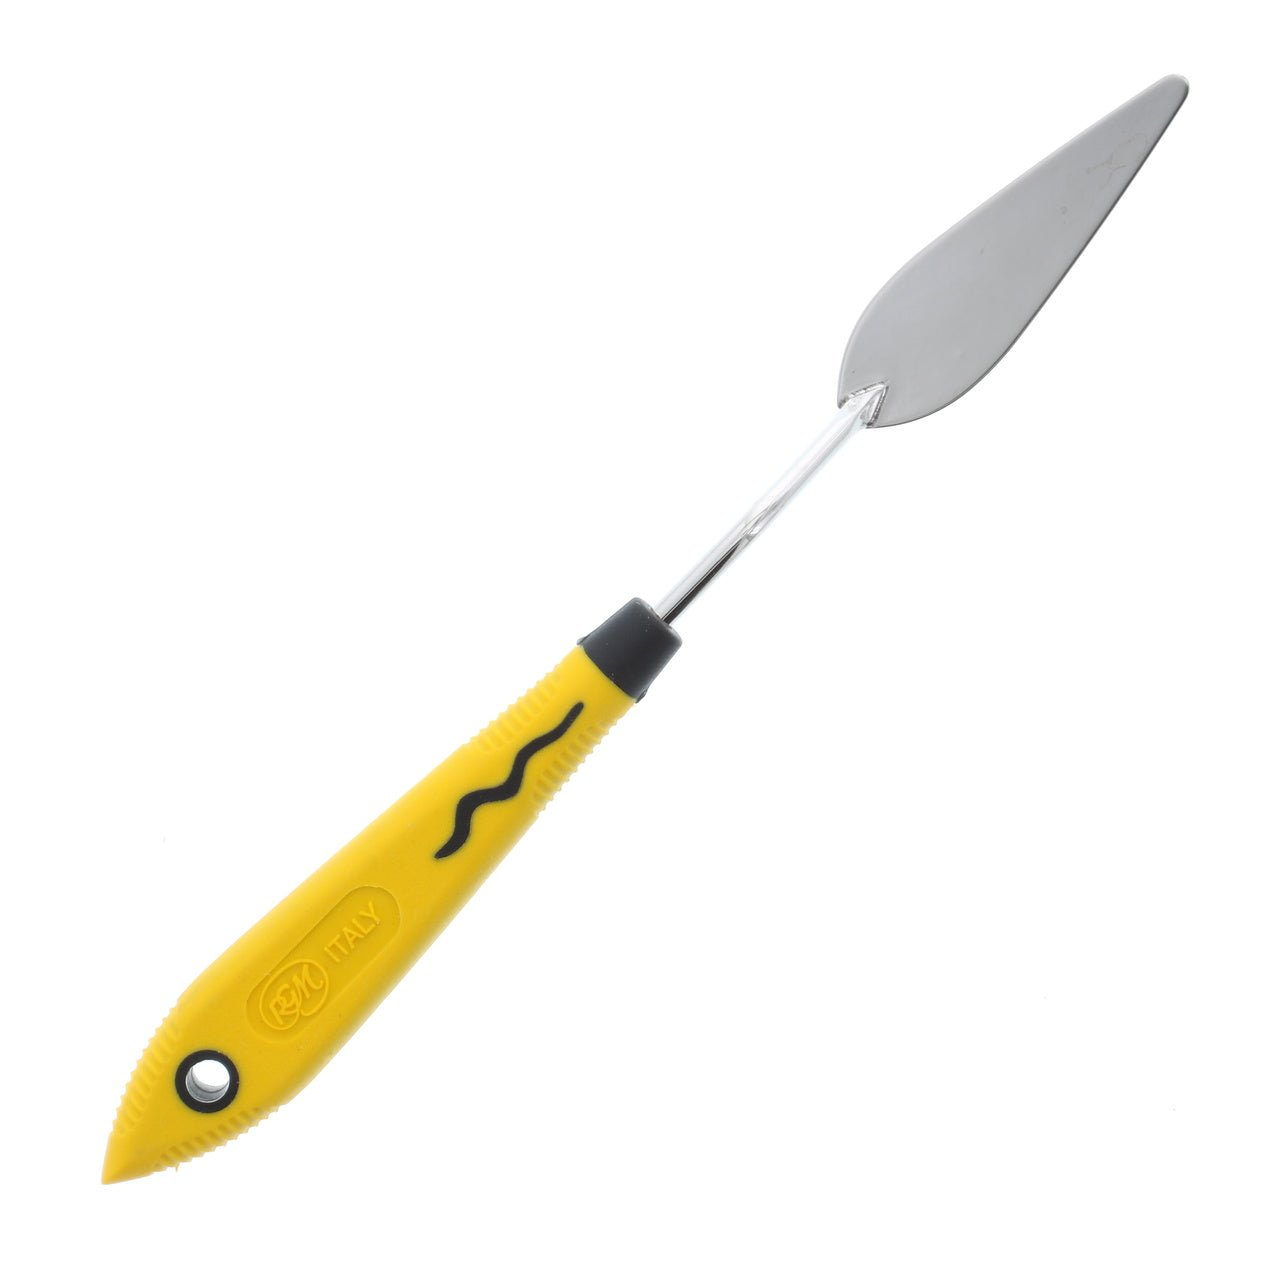 RGM Soft Grip Painting Knife #010 (Yellow Handle)